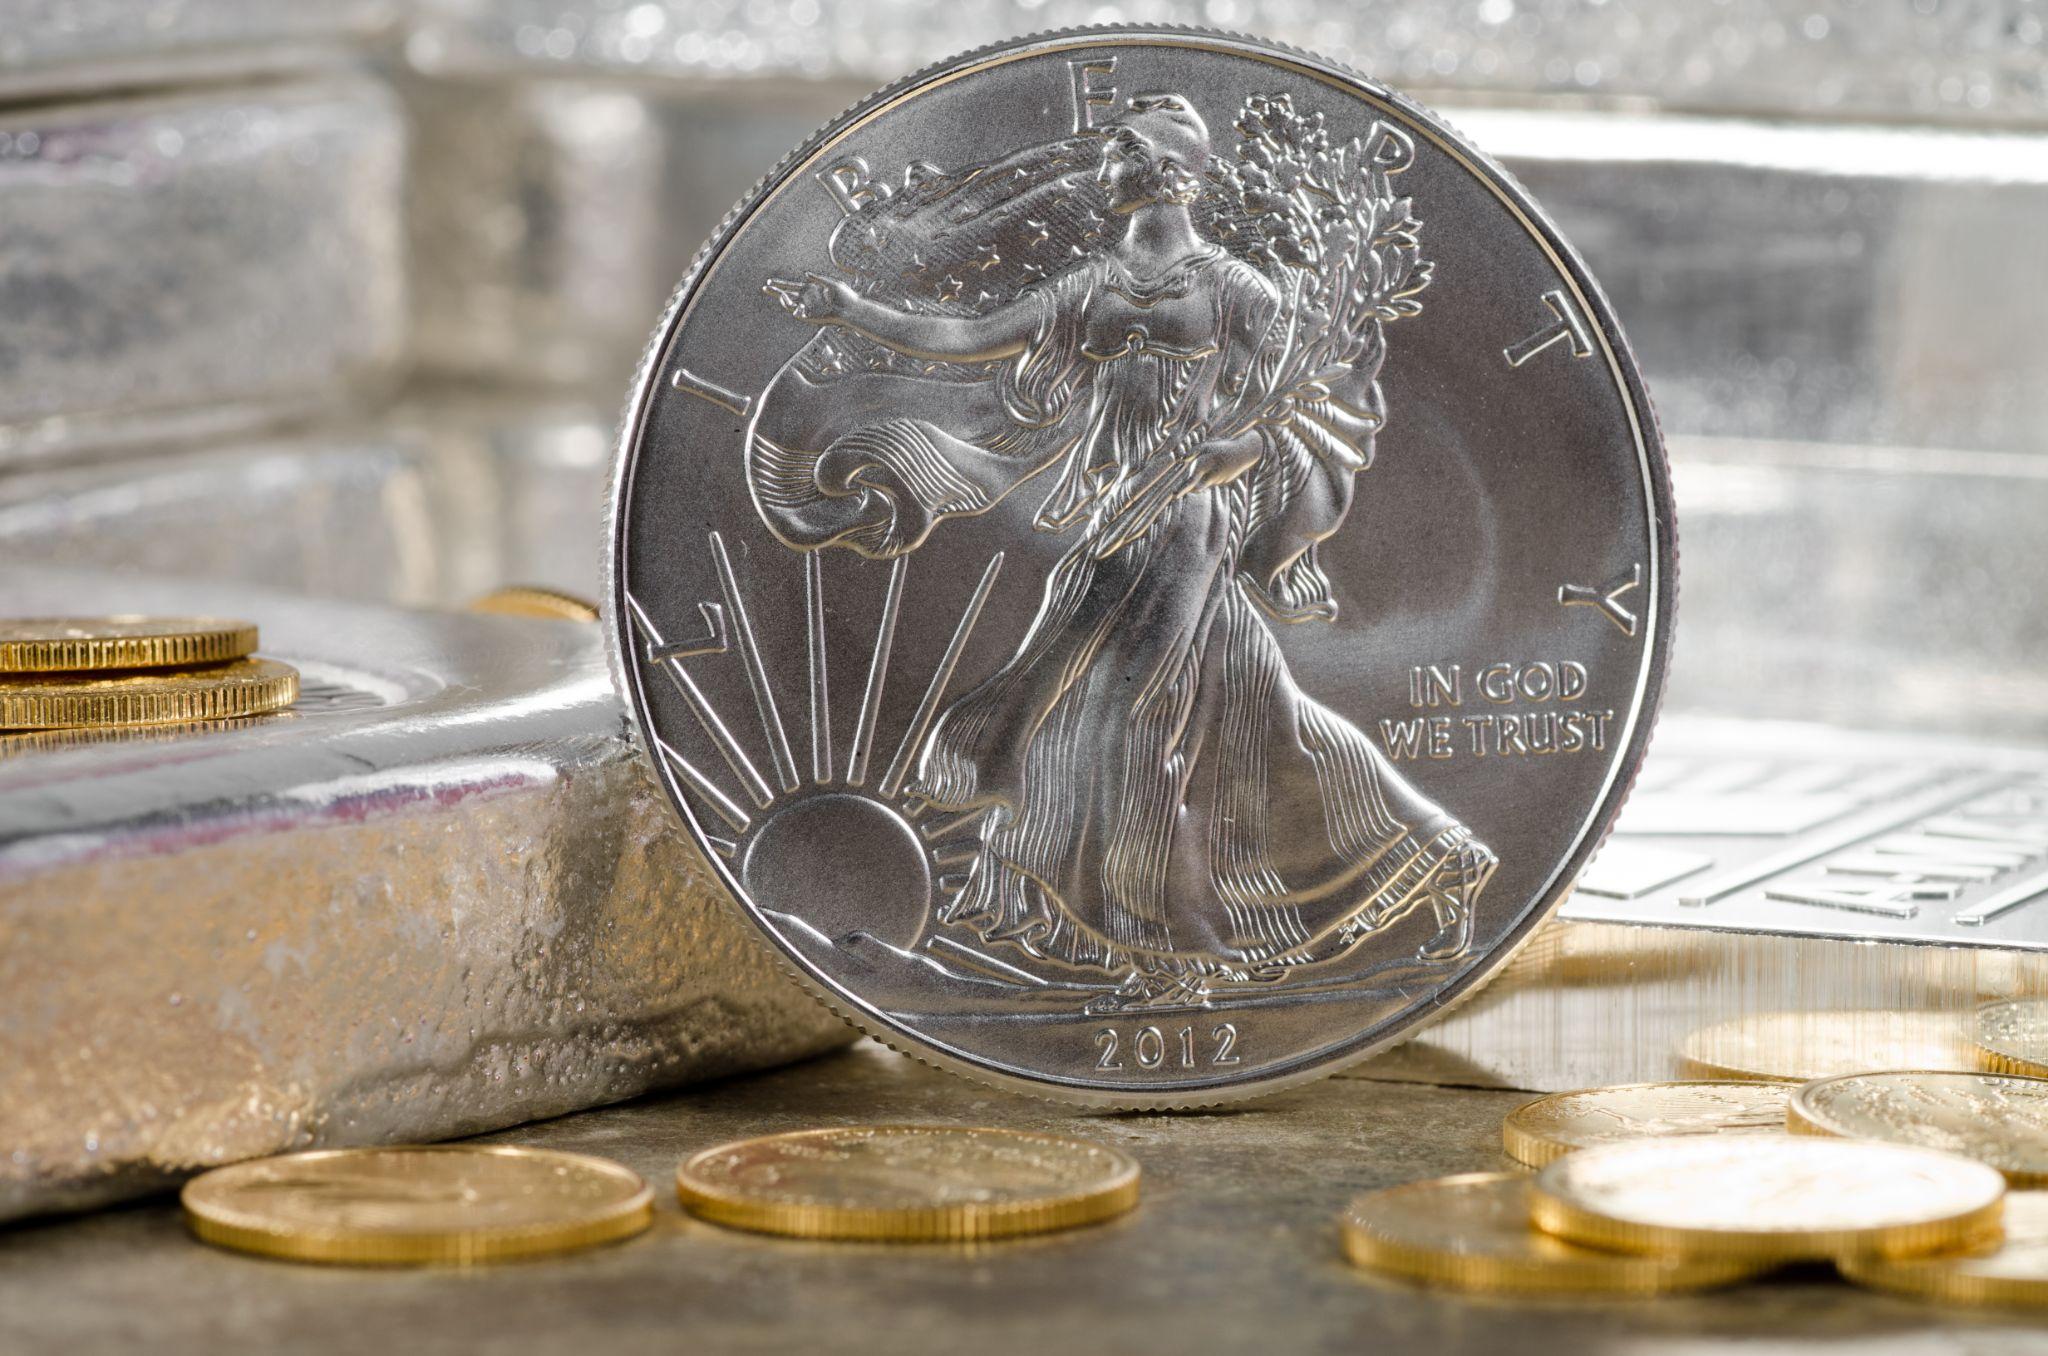 2012 Silver Liberty coin on table with gold coins.